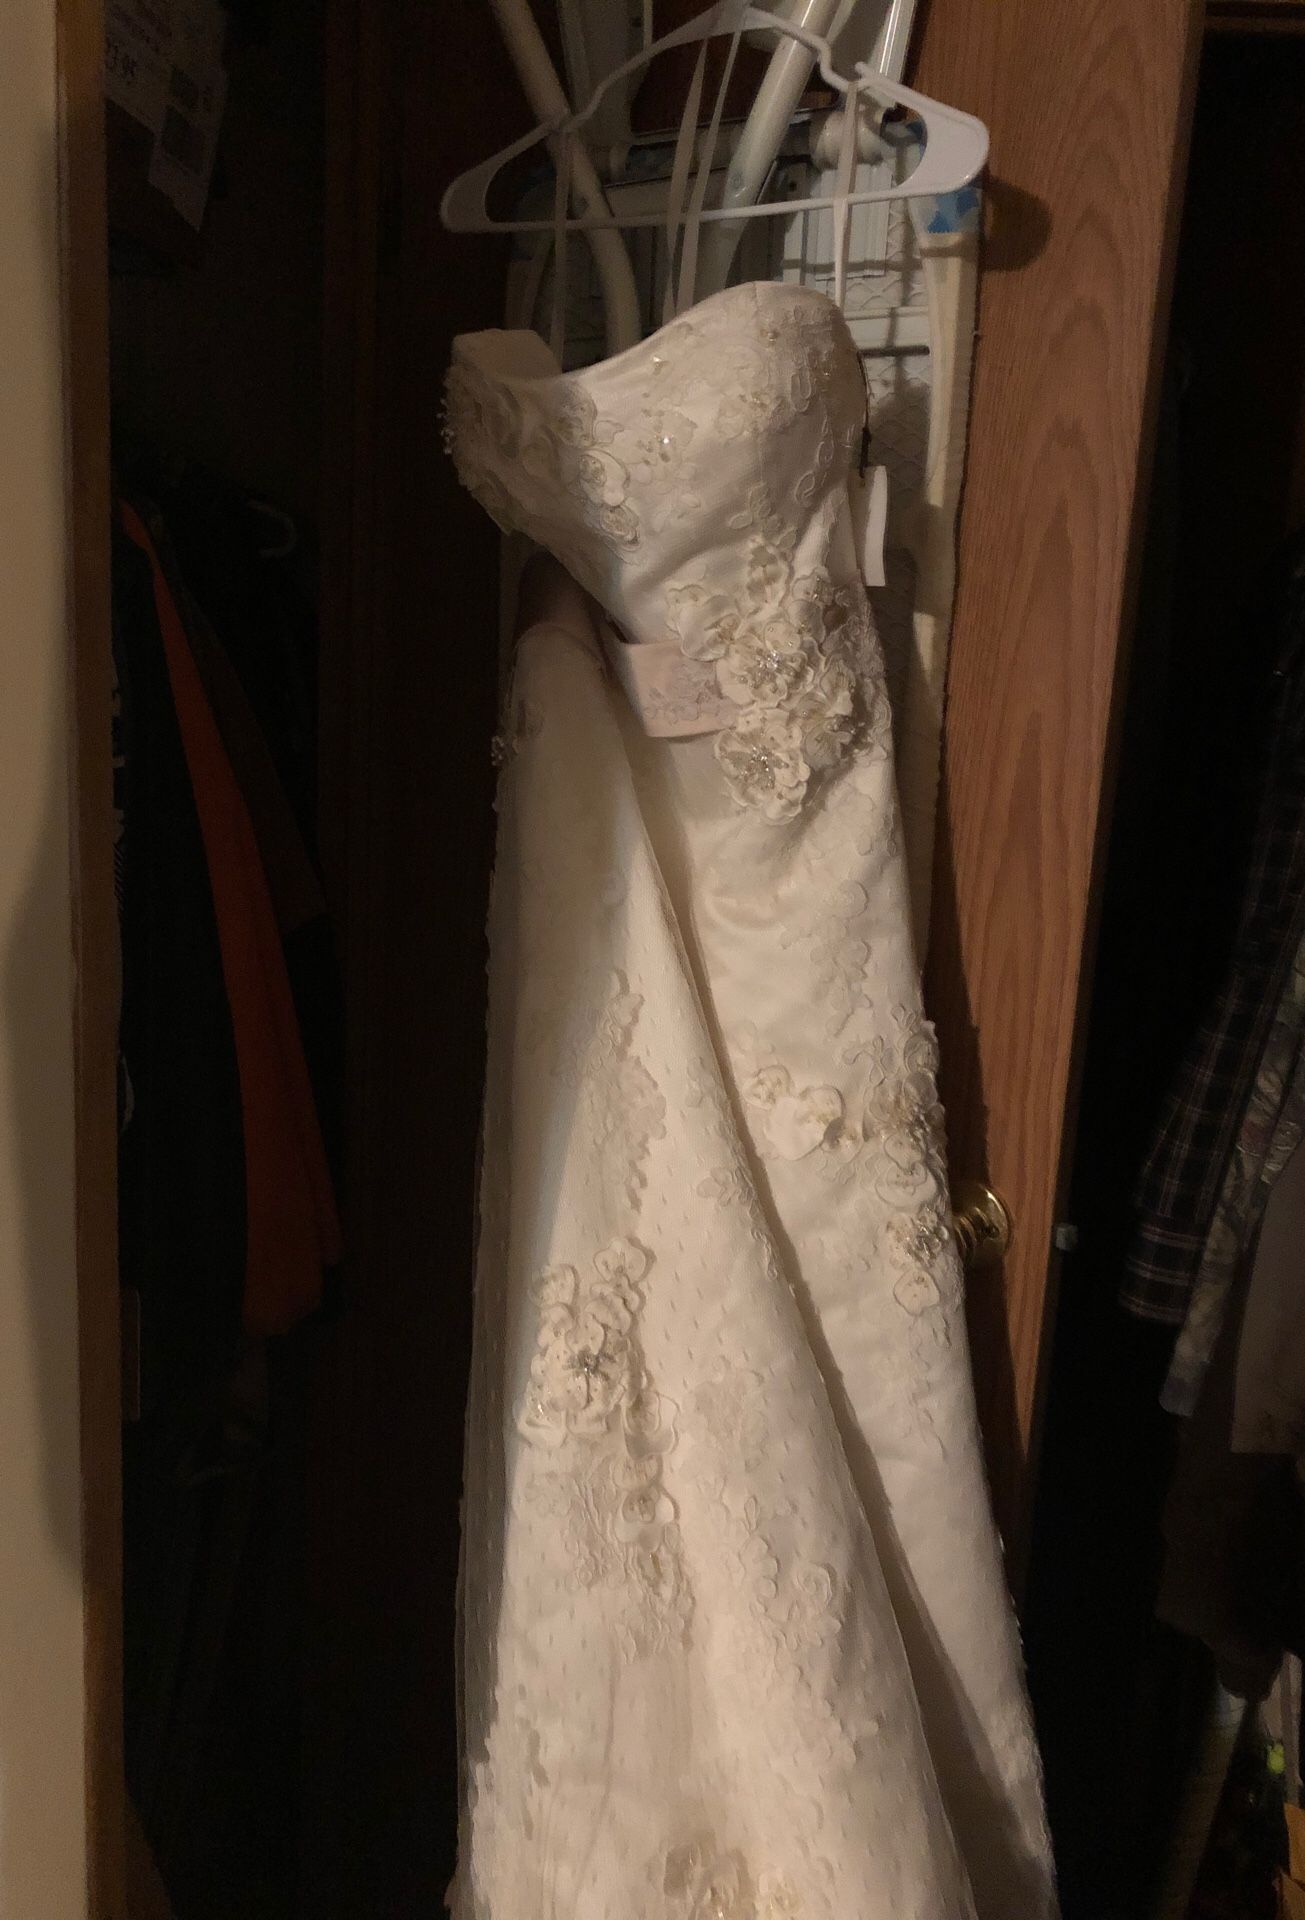 Wedding. Dress New. With train an it’s off white